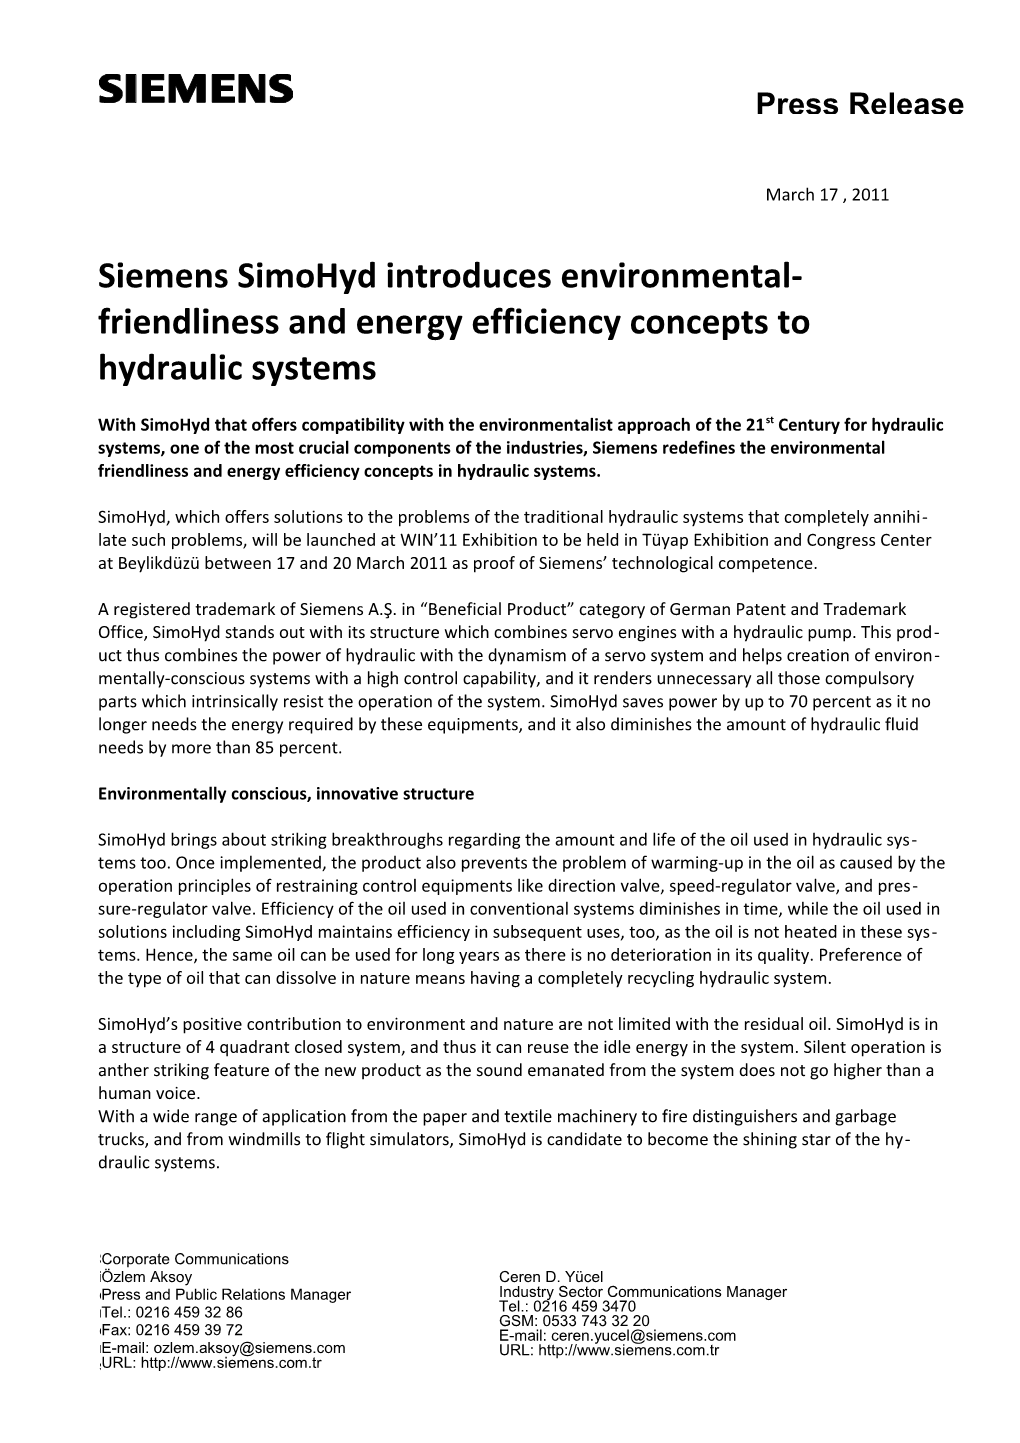 Siemens Simohydintroduces Environmental-Friendliness and Energy Efficiency Concepts To